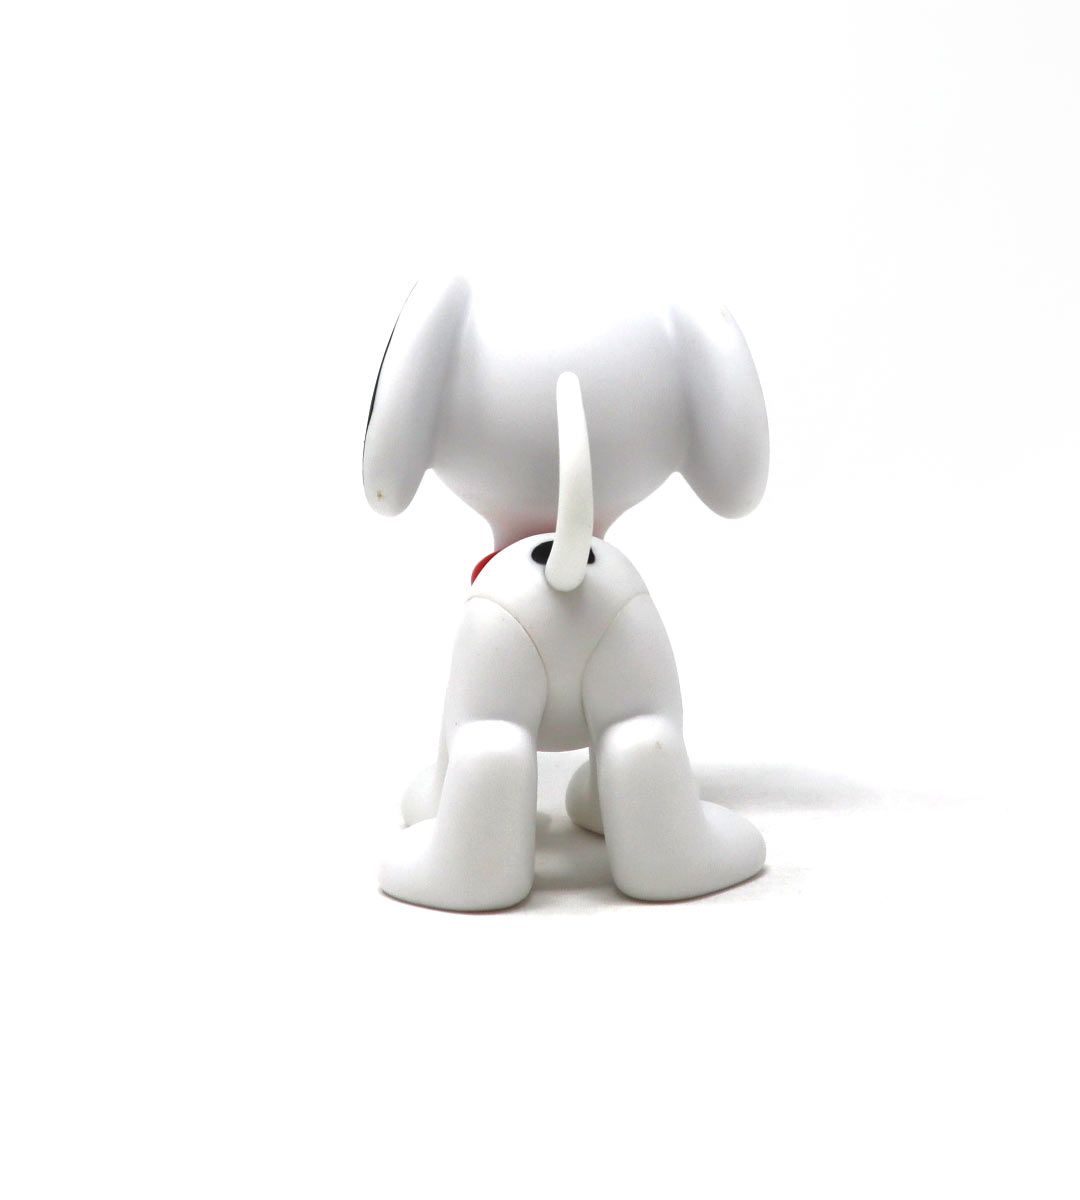 VCD Snoopy 1953 version - Peanuts